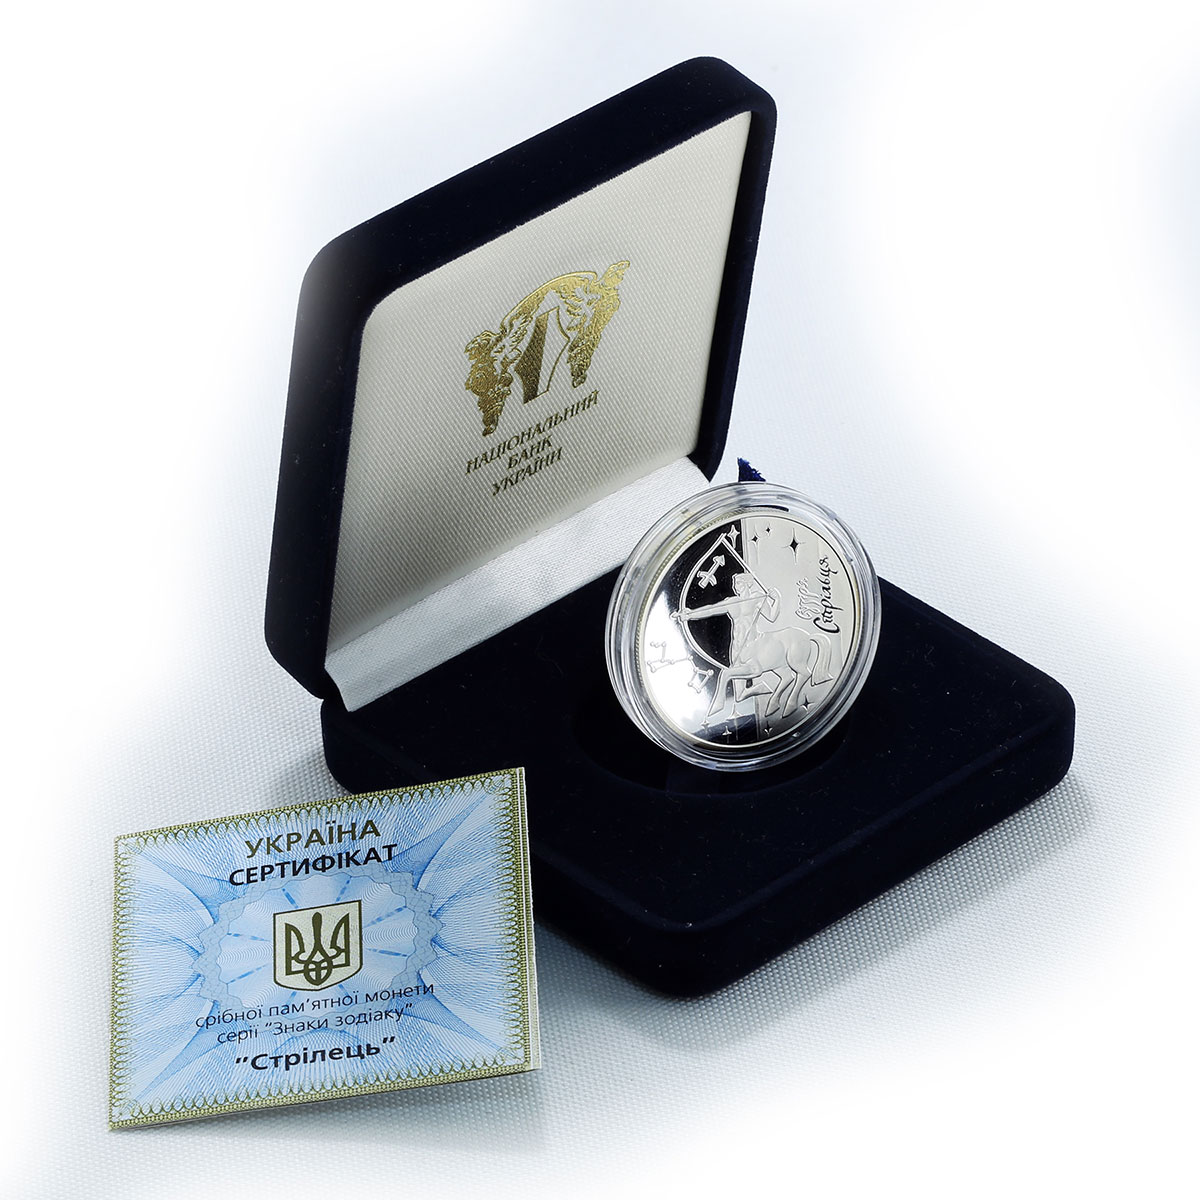 Ukraine 5 hryvnas Signs of the Zodiac Archer Silver Proof Coin 2007